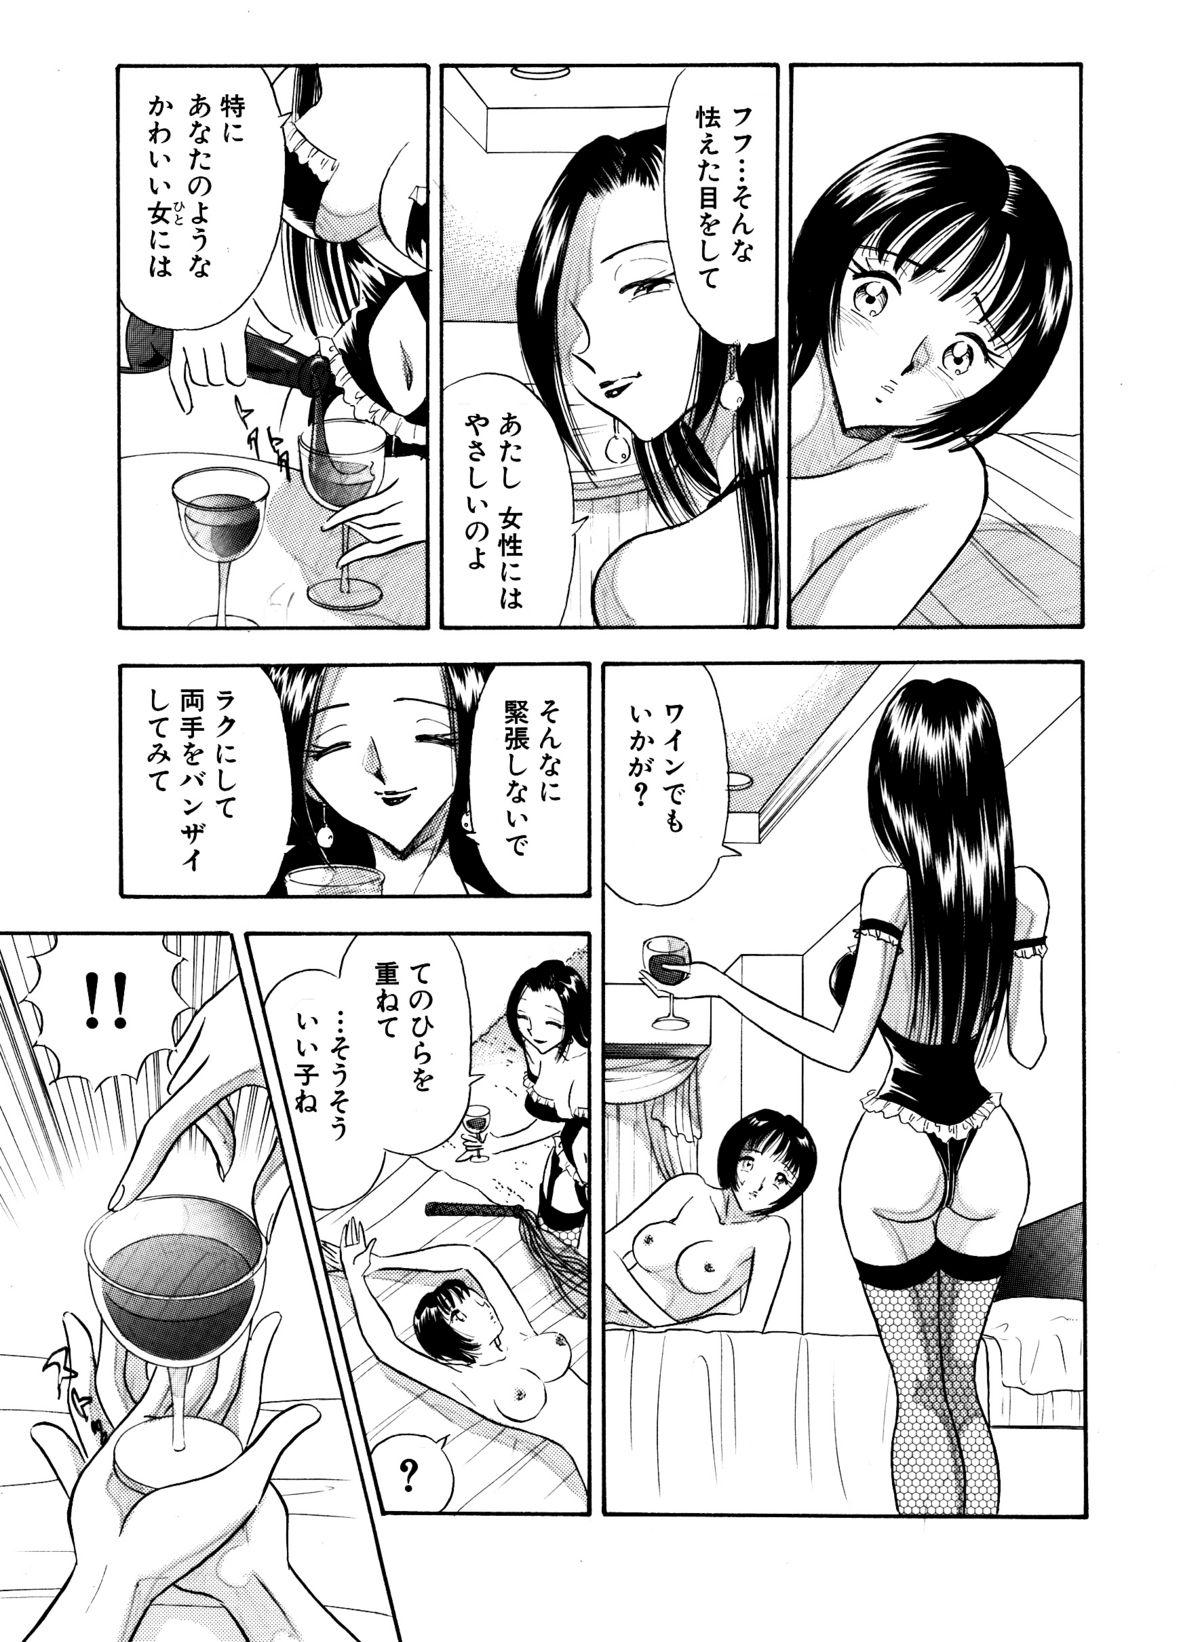 Best Blow Job Ever Chijo tsuma 15 Wet - Page 9